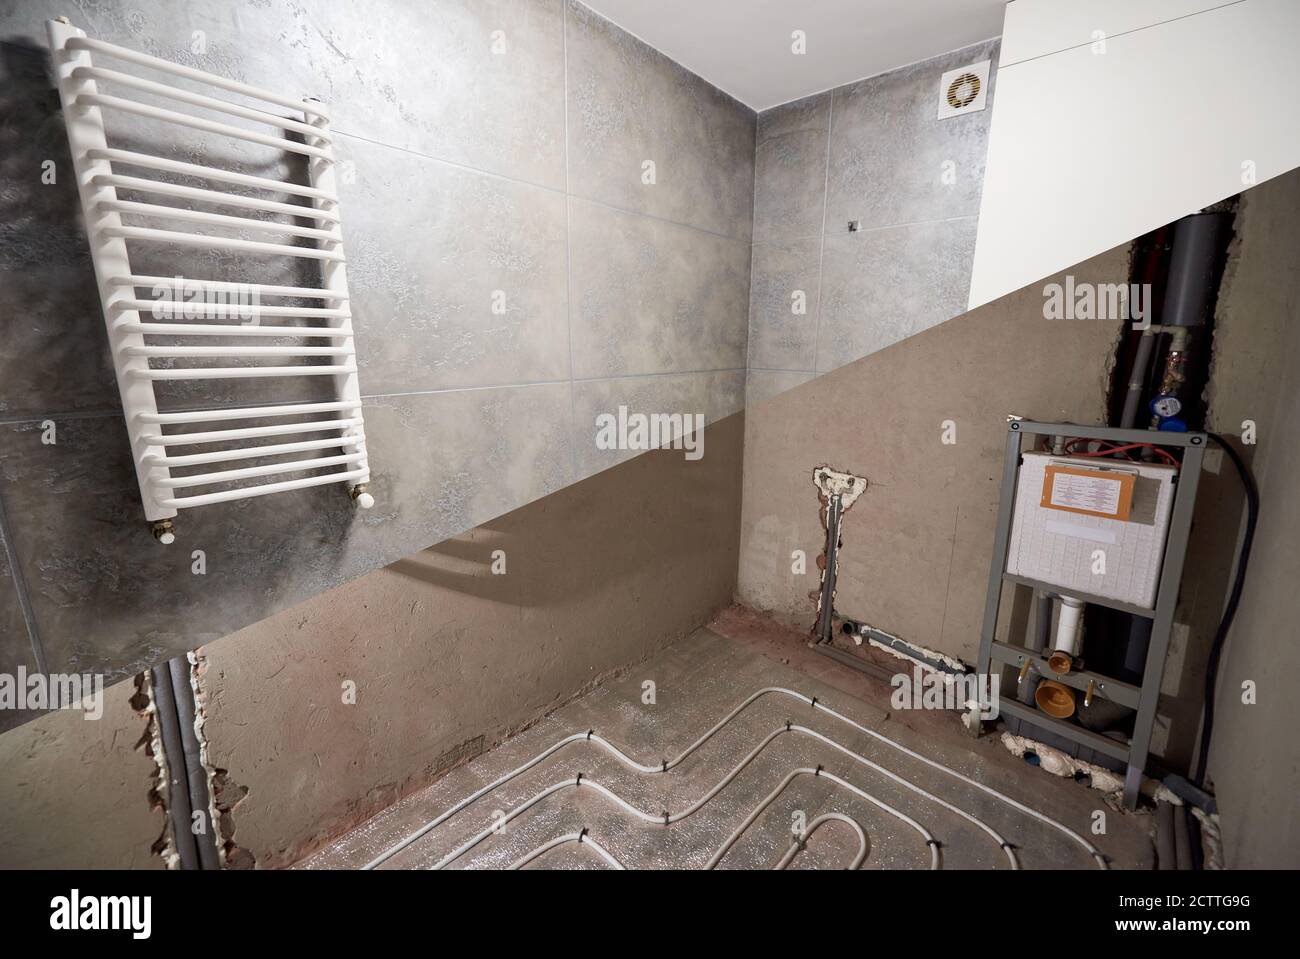 Comparison of bathroom in apartment before and after renovation. Interior design of a modern bathroom in grey tones, warm floor, water pipes and floor heating pipe system. Renovation concept Stock Photo